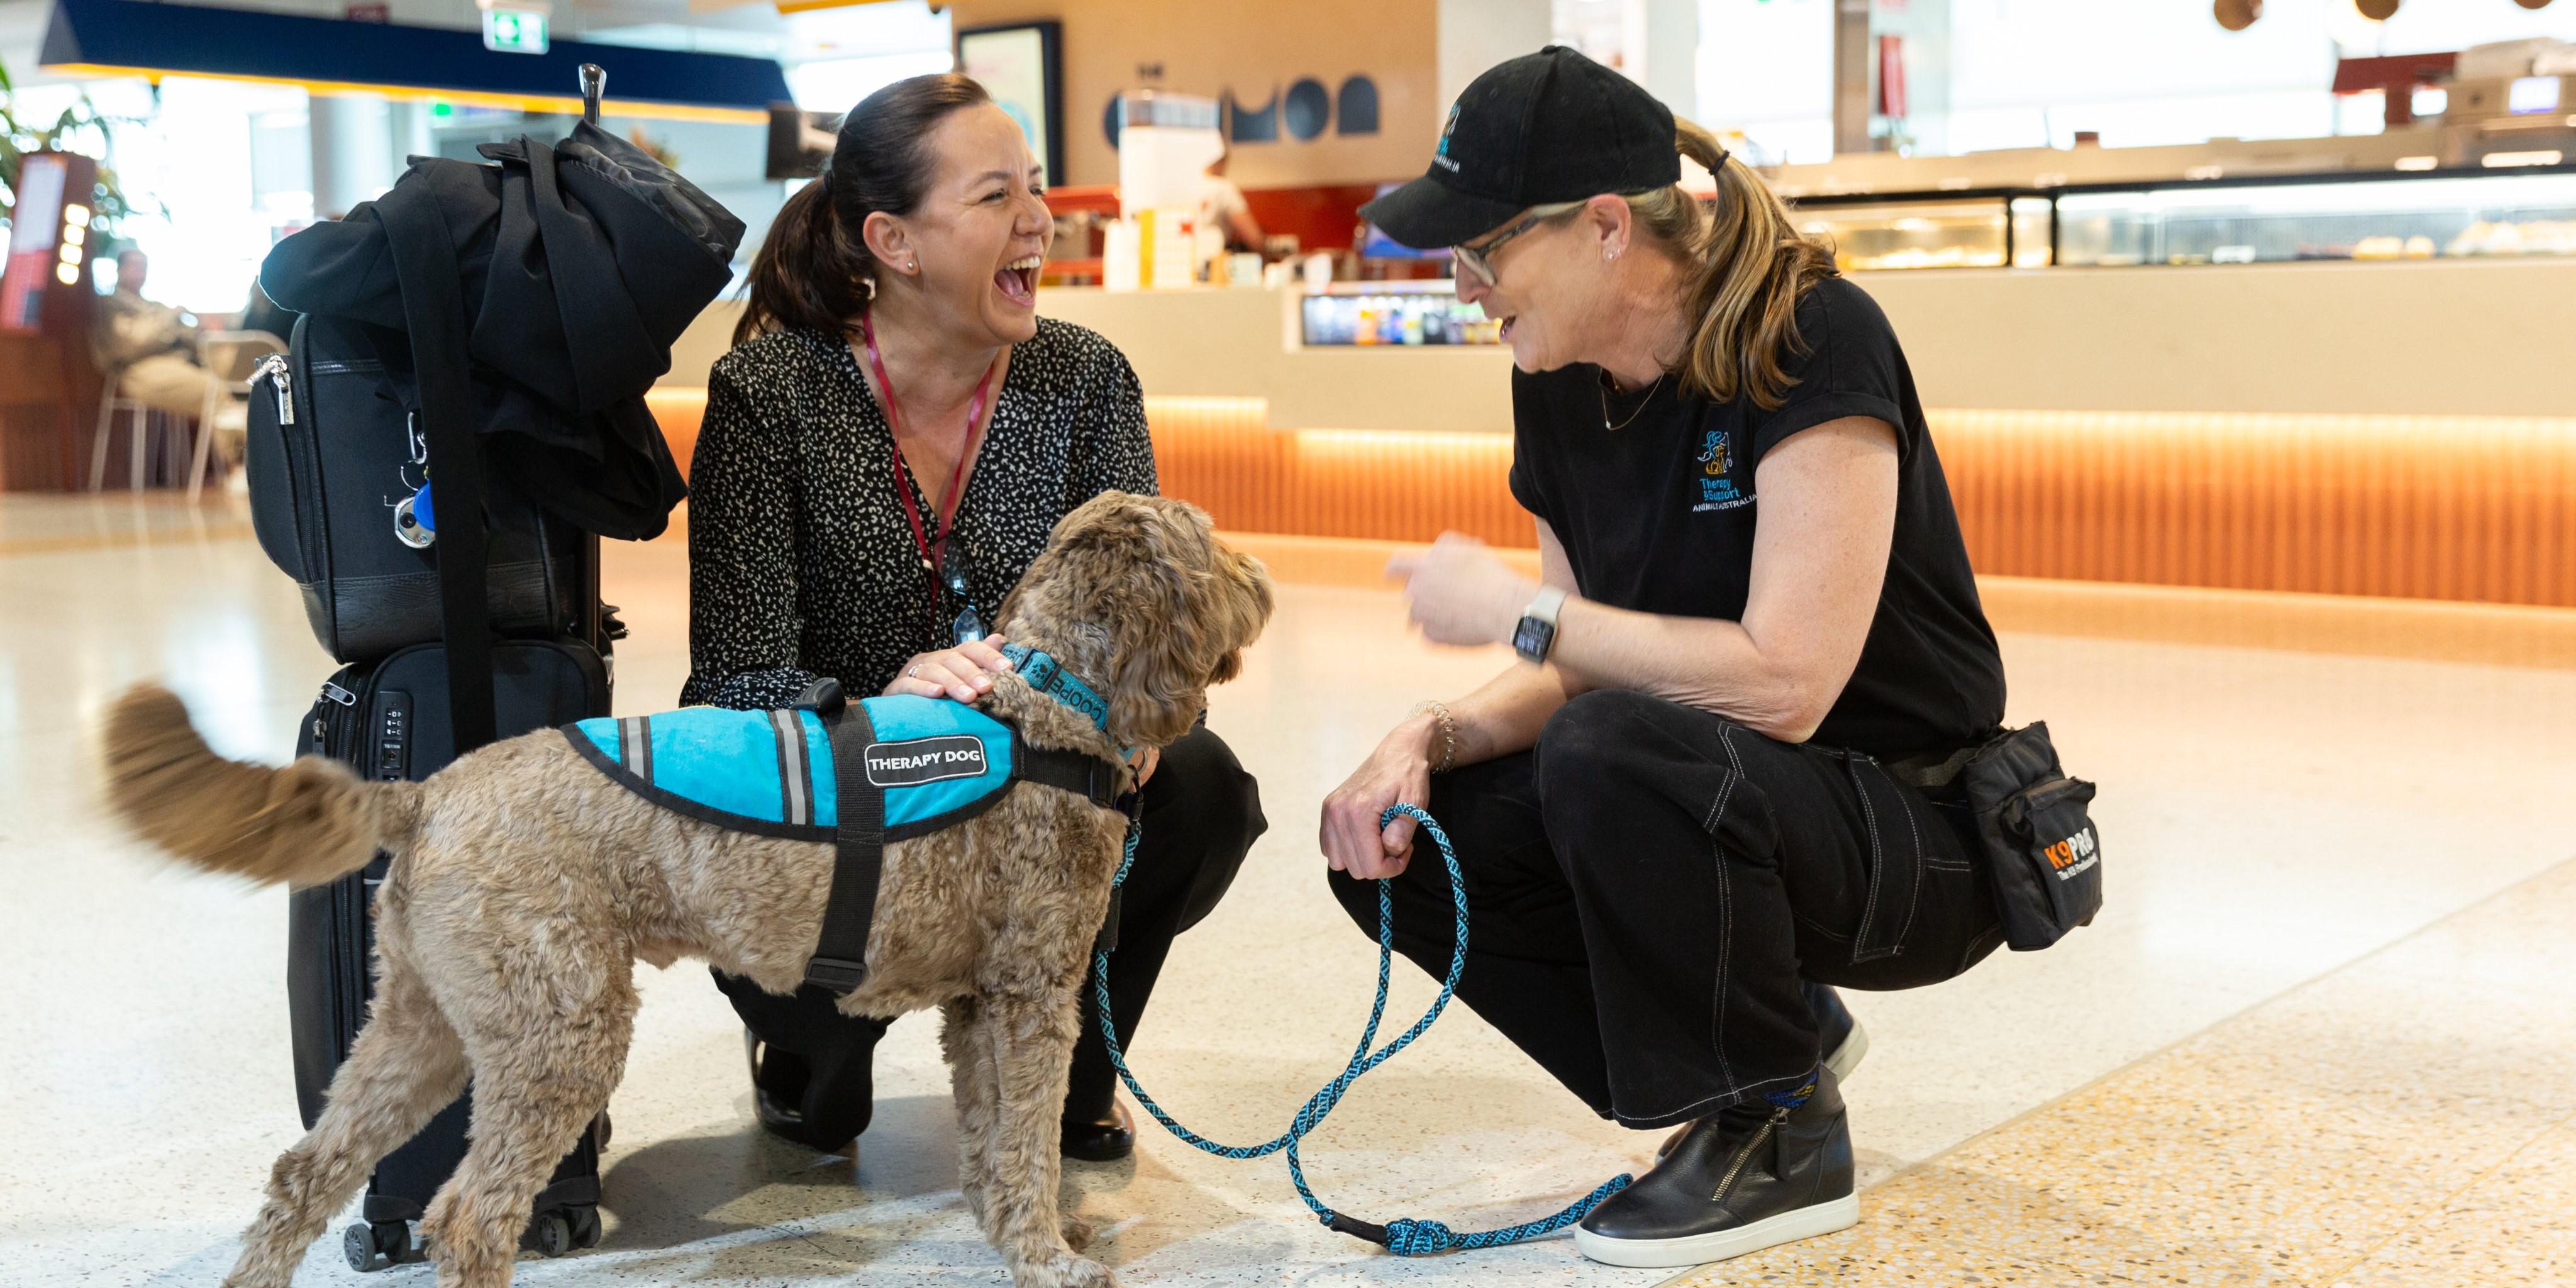 A therapy dog and their handler interreacting with a traveller who is laughing